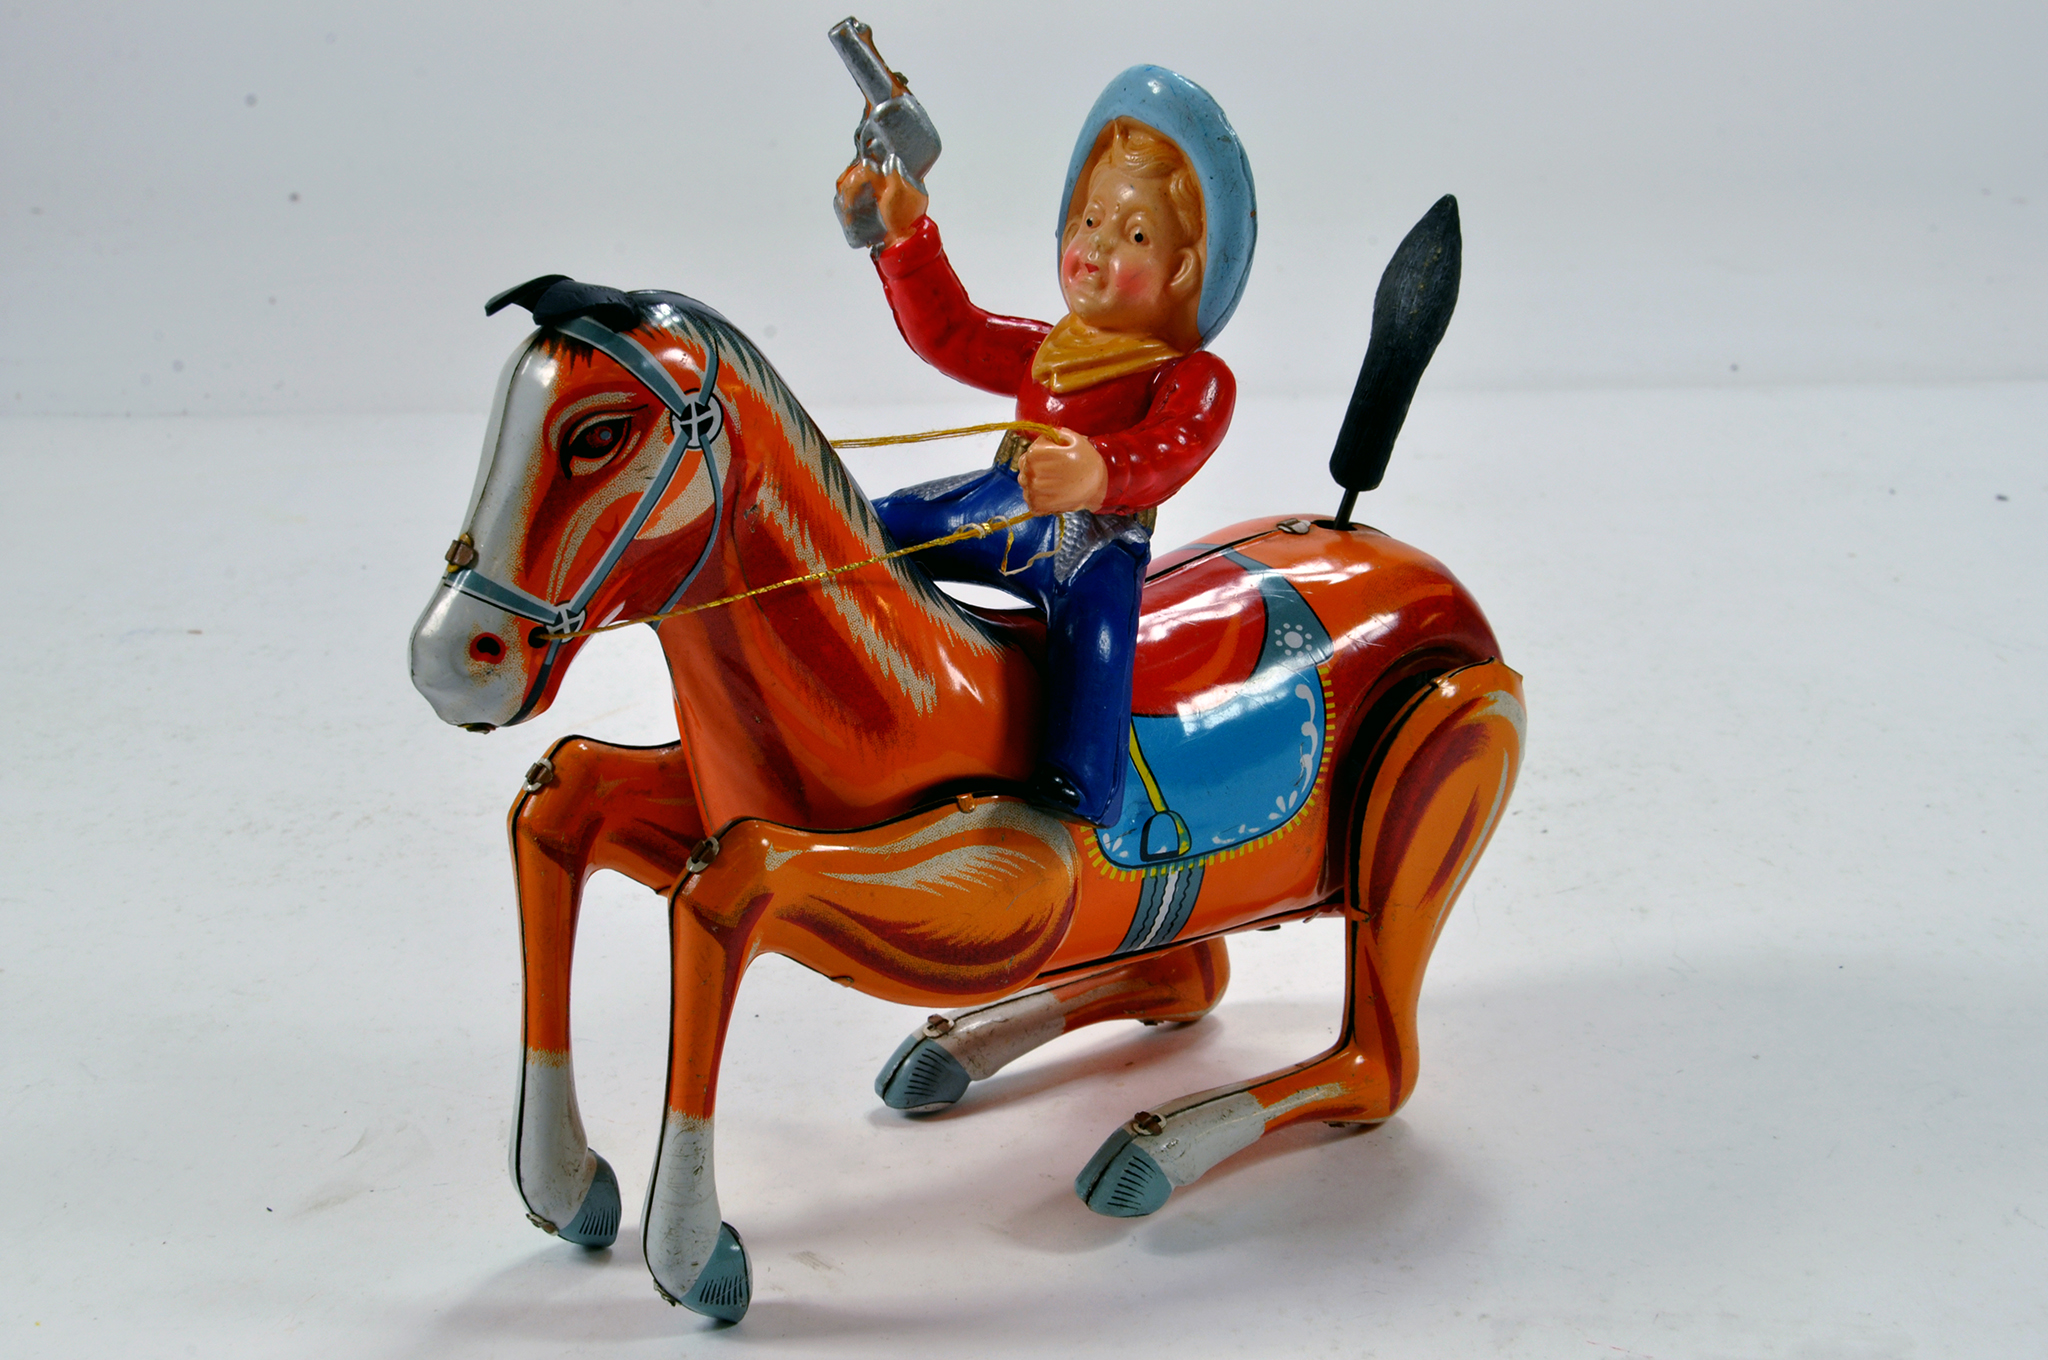 Scarce original issue Cowboy on Horse. Tin Celluloid type issue. Well preserved and displays well.